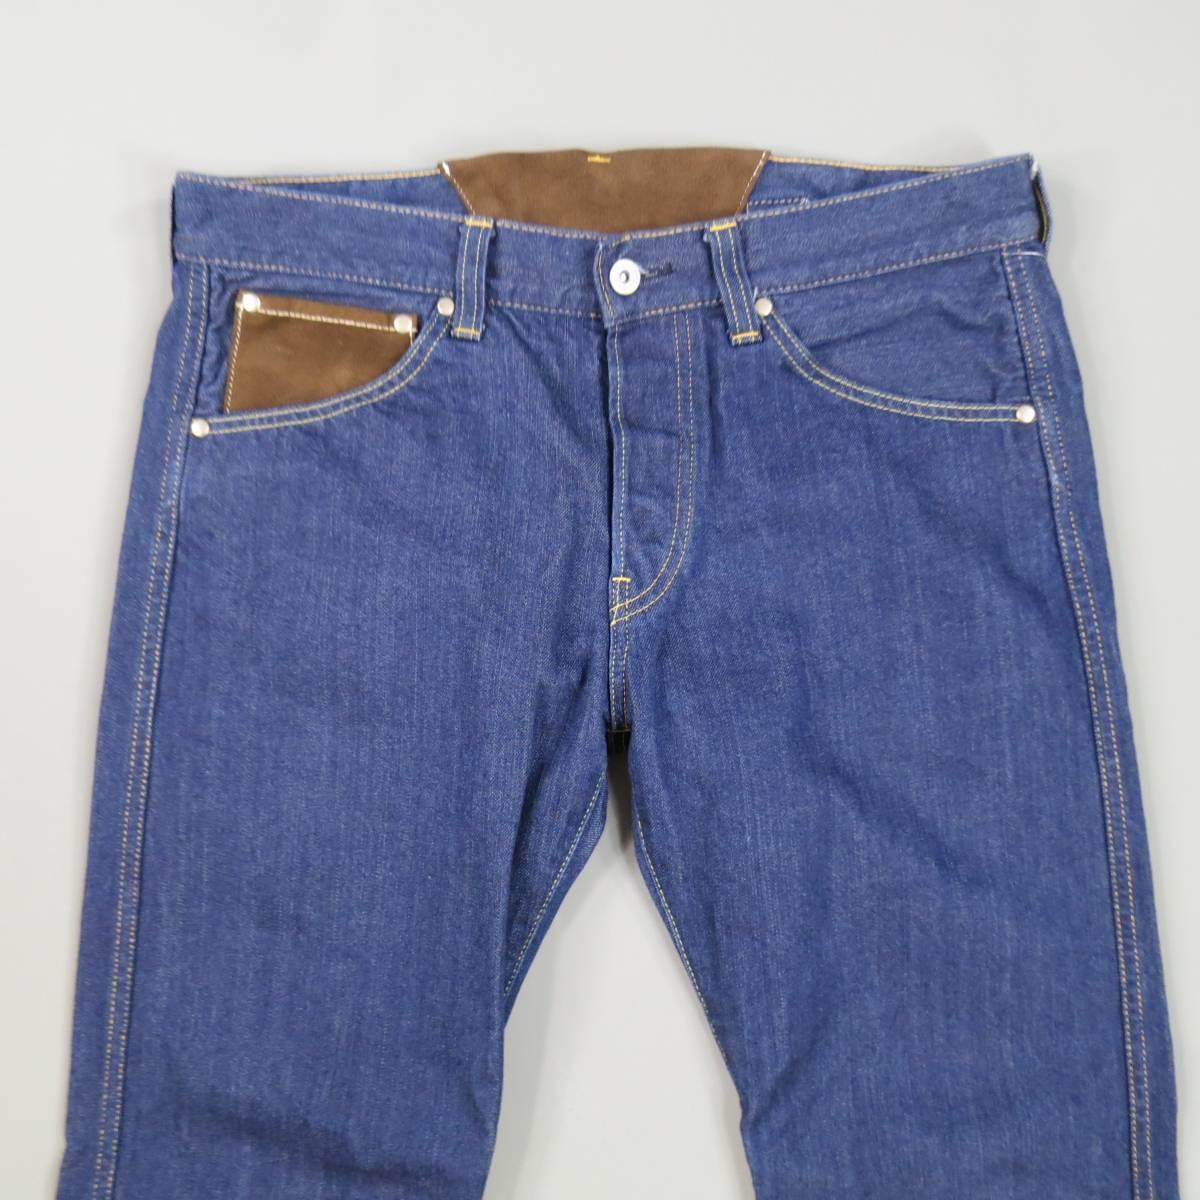 These JUNYA WATANABE MAN jeans come in indigo blue cotton denim and feature a tapered leg, button fly, vegan brown suede frontal pocket and matching back belt panel, and olive green canvas utility zip pockets on back. Made in Japan.
 
Excellent